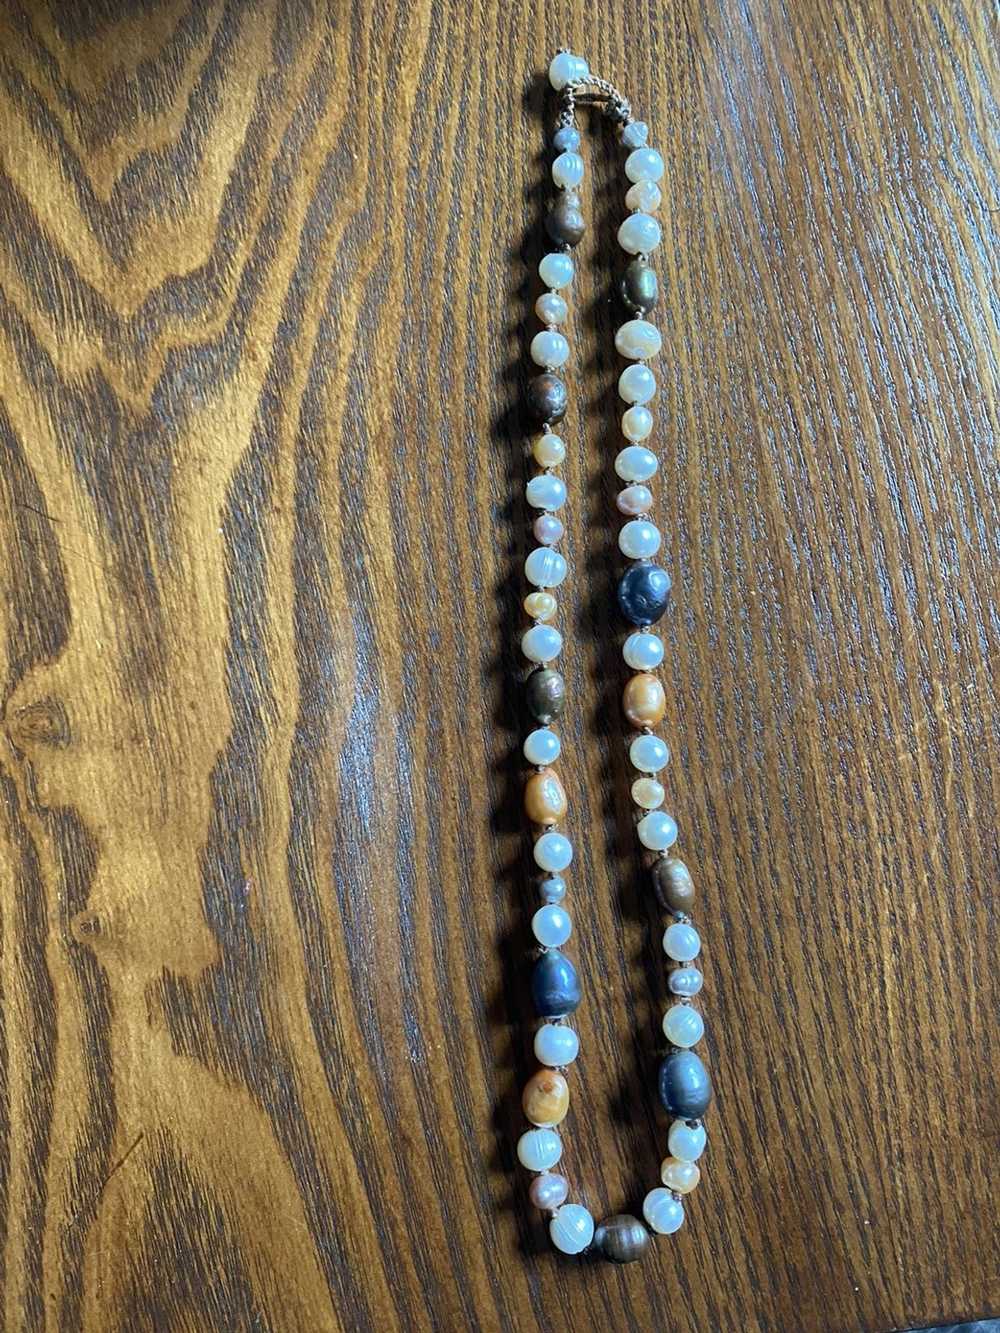 Custom Distorted Color Pearl Necklace - image 5